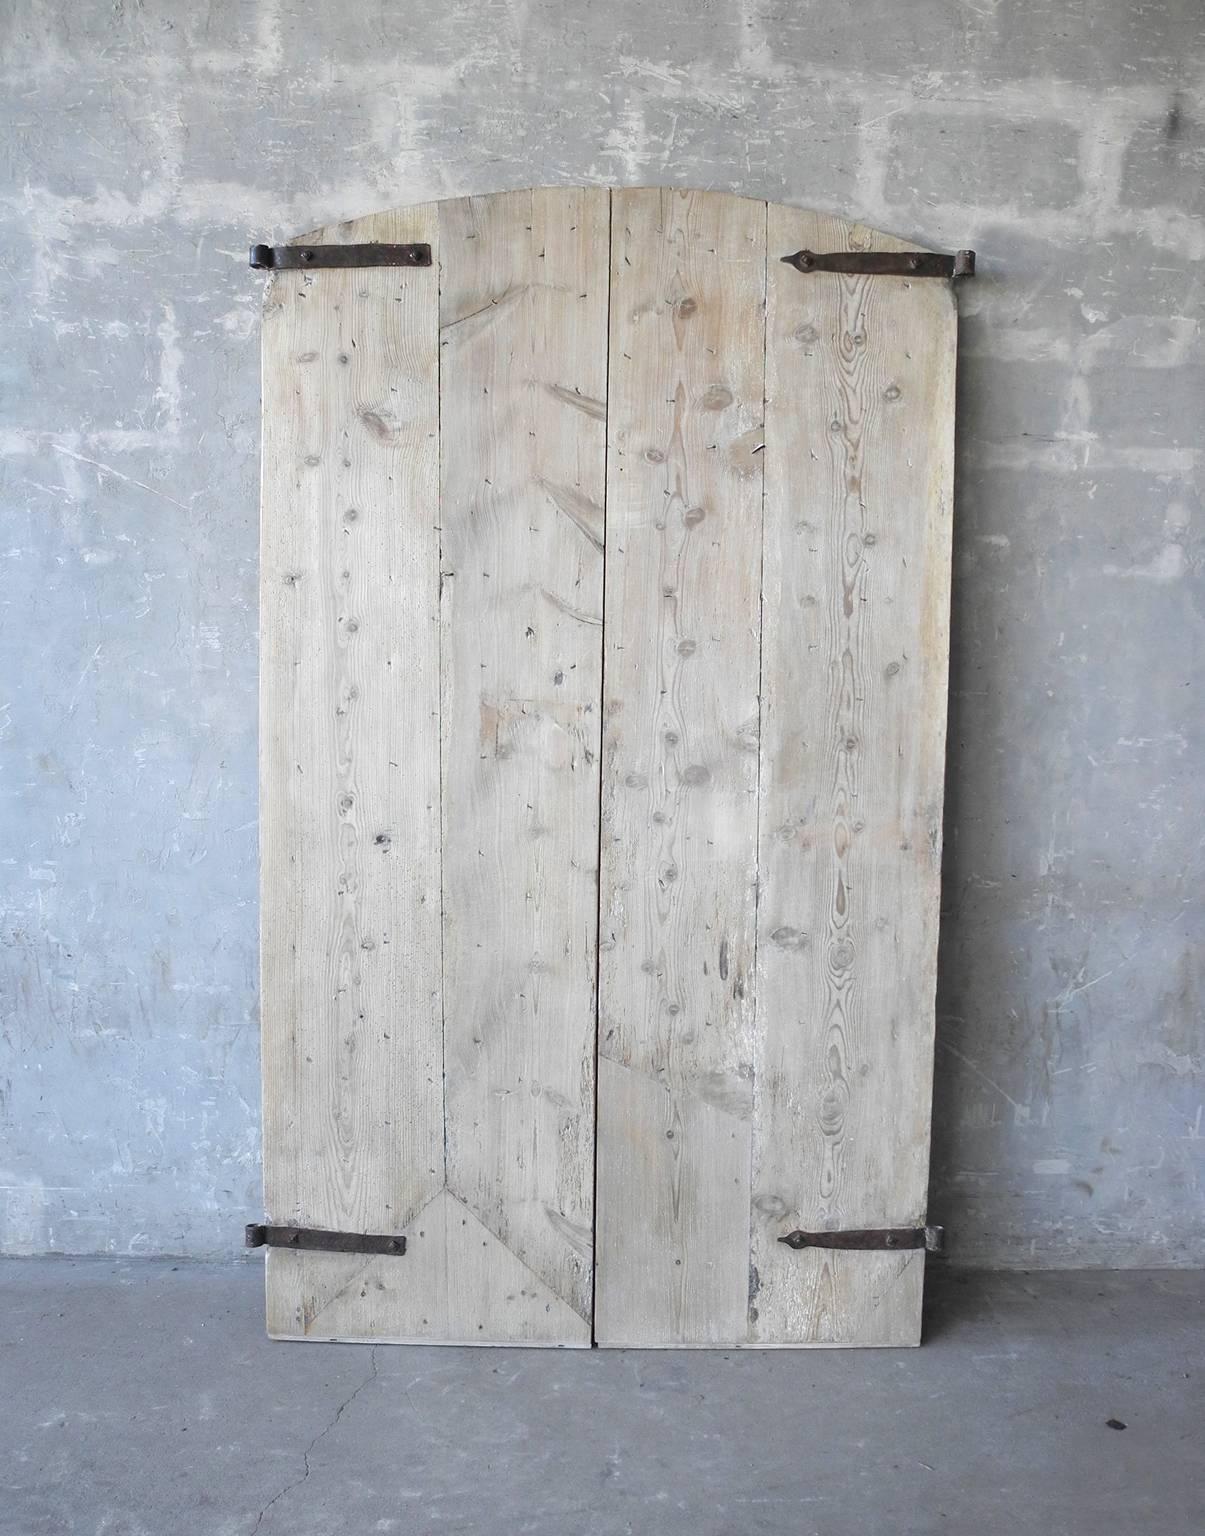 This is a fabulous pair of 18th century doors from a "Provençal Mas." They have been stripped to reveal they're beautiful natural wood. They also include antique hardware and nails giving the door a truly handmade feel. 